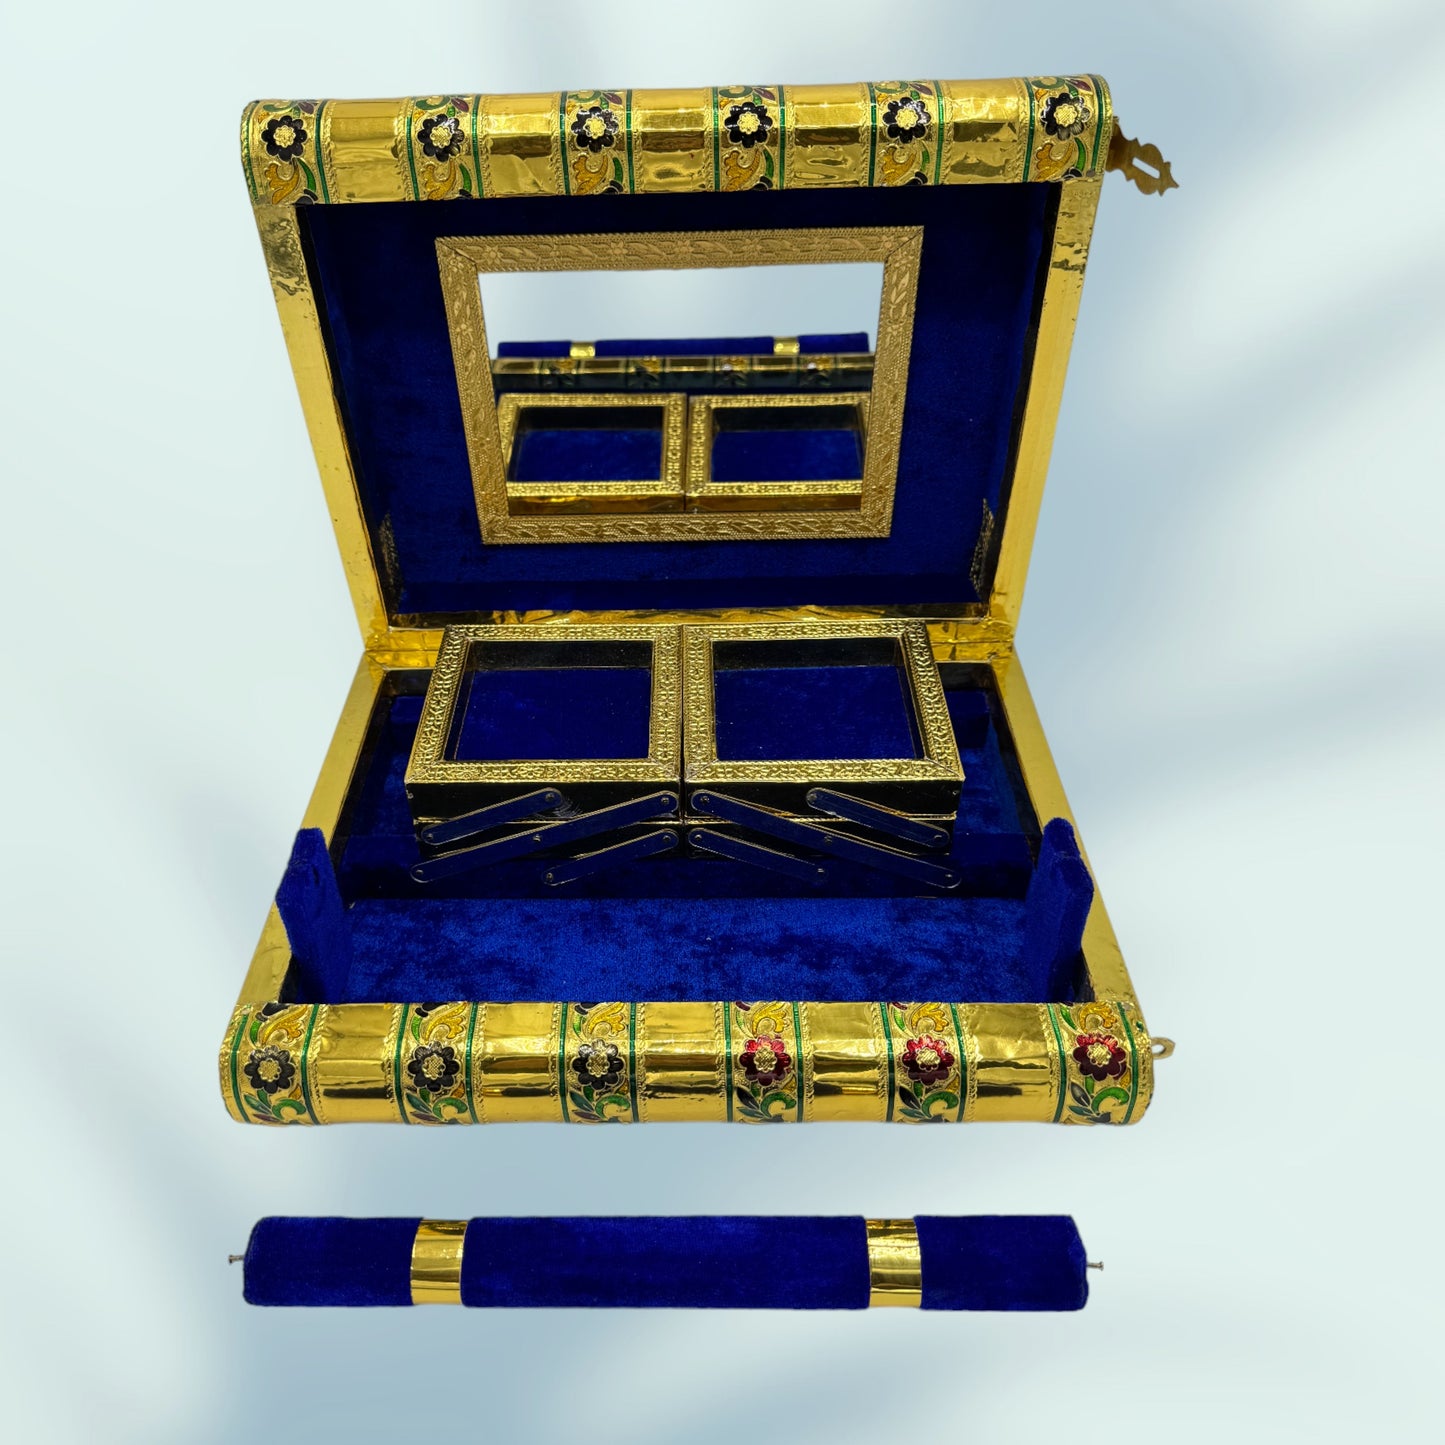 Open box reveals royal blue velvet lining with a lock on the side and a removable dowel. this photo shows the box with the trays folded down